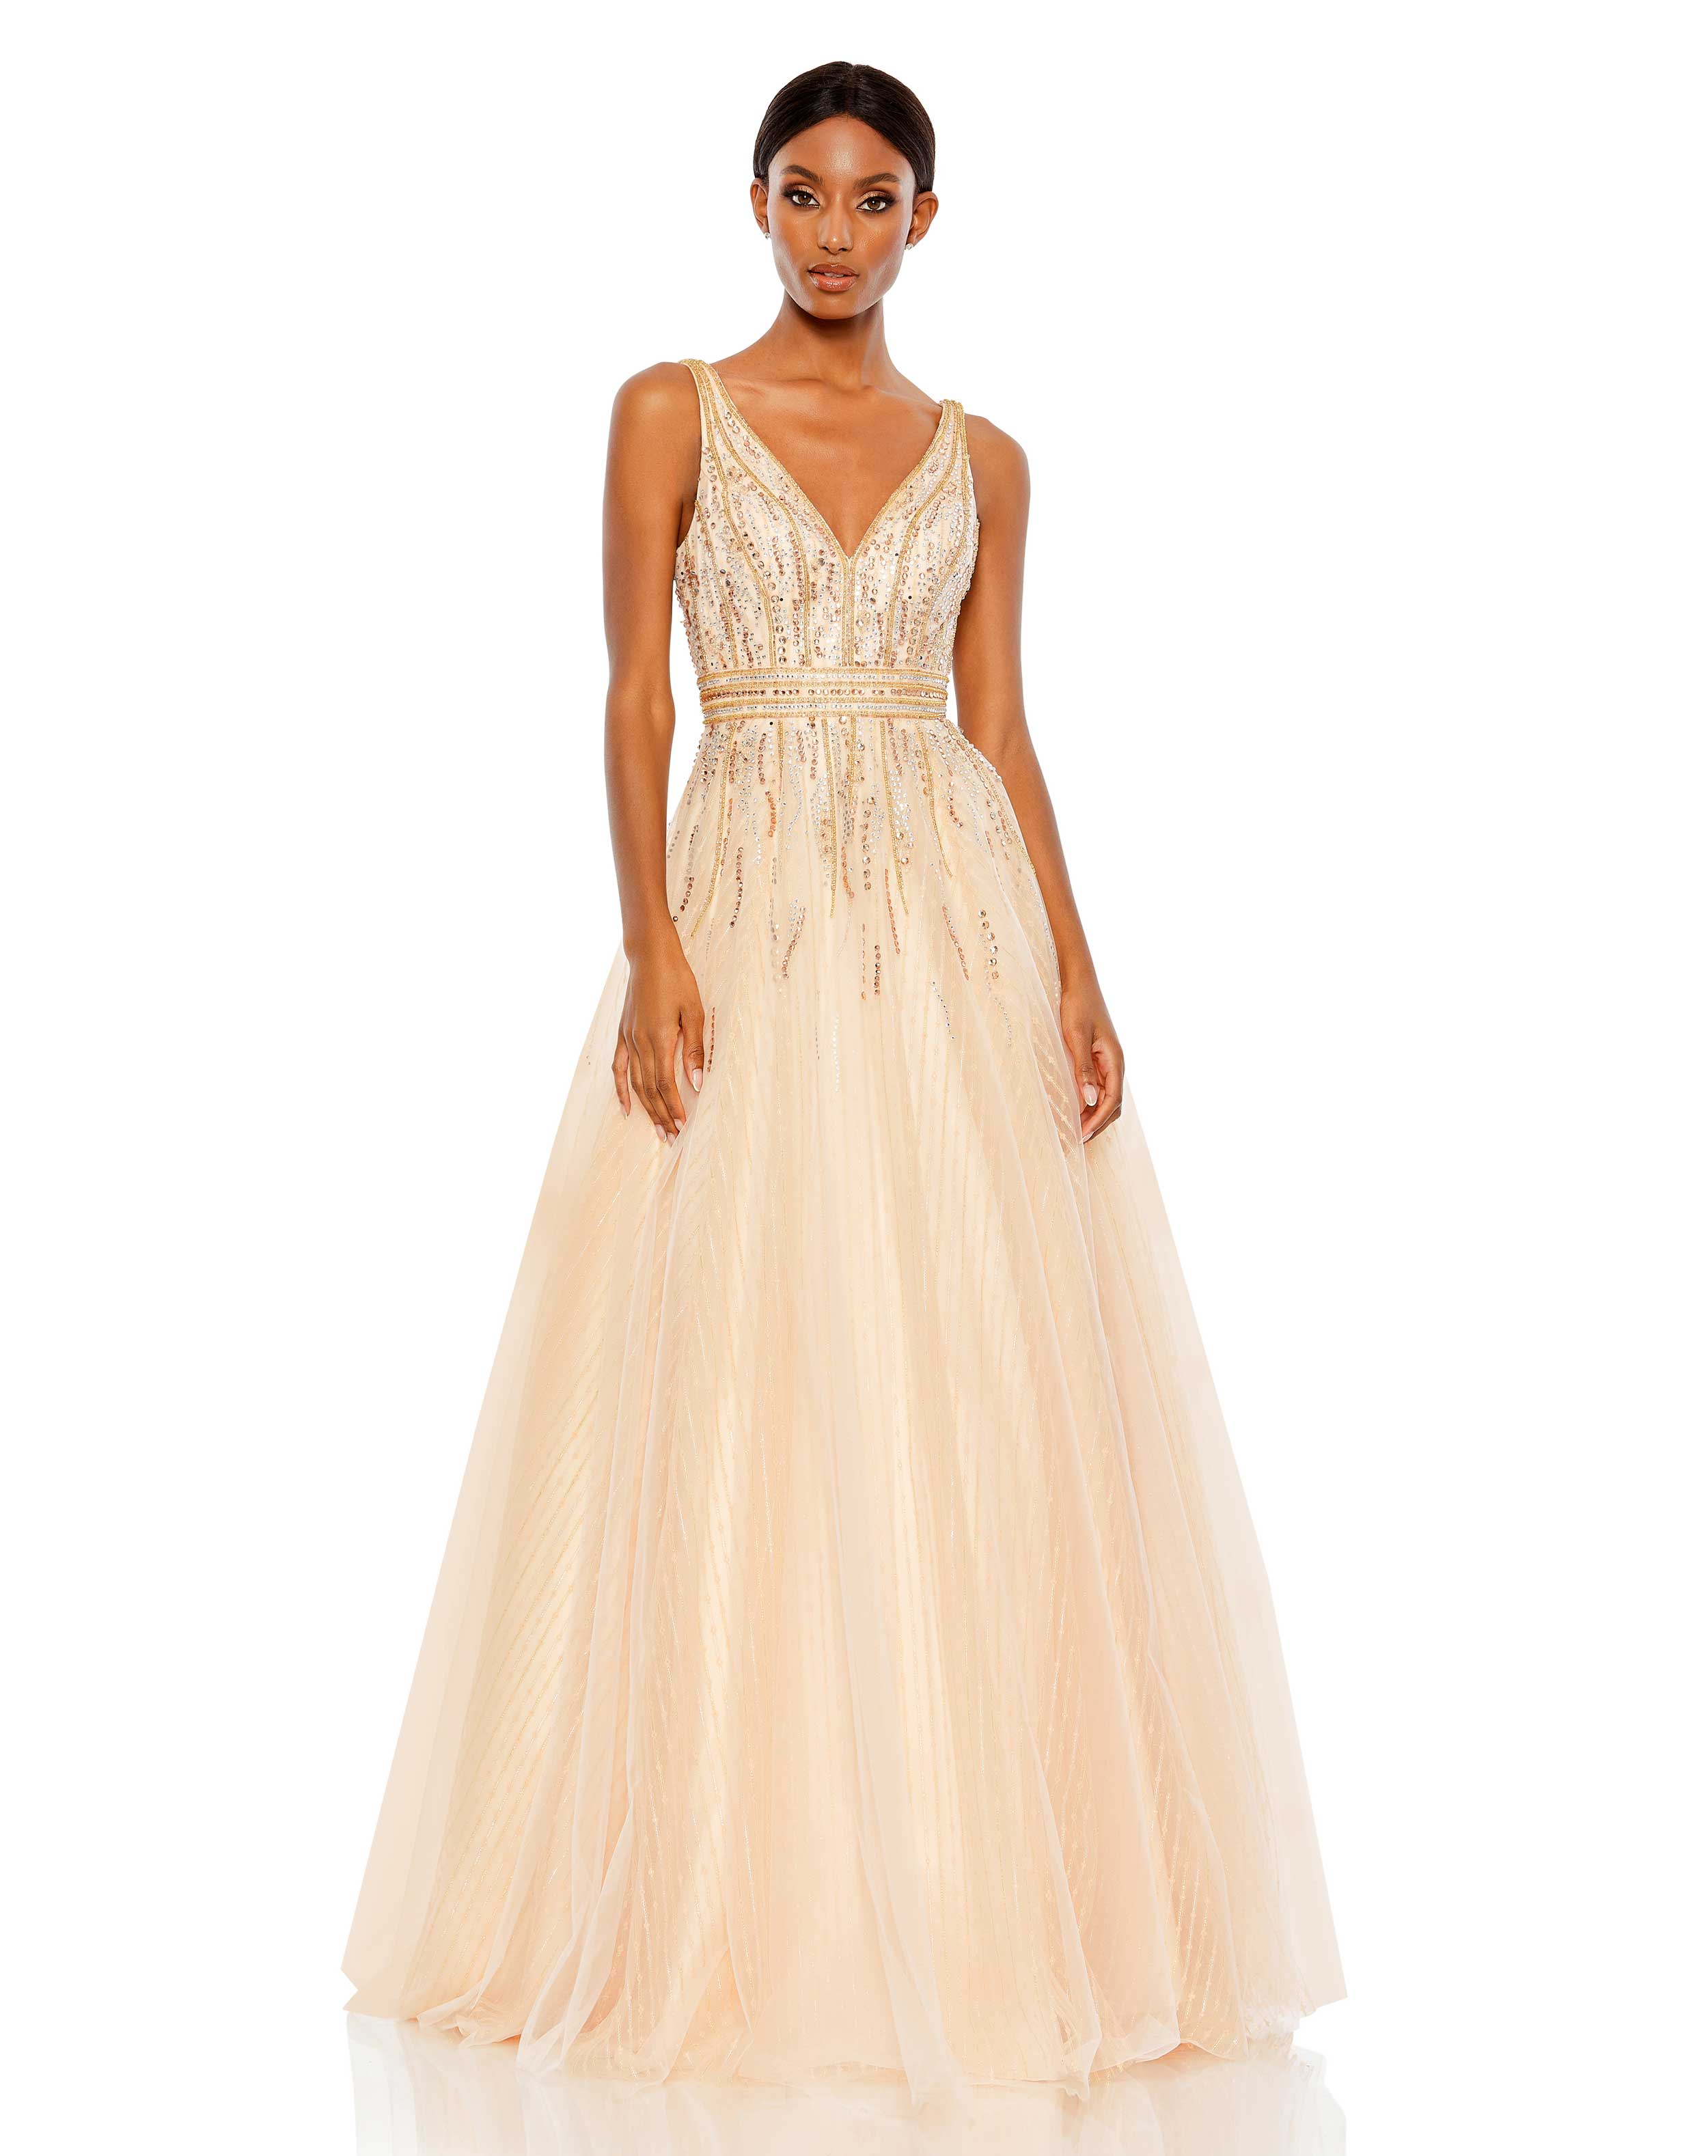 Jewel Encrusted Tulle Ball Gown